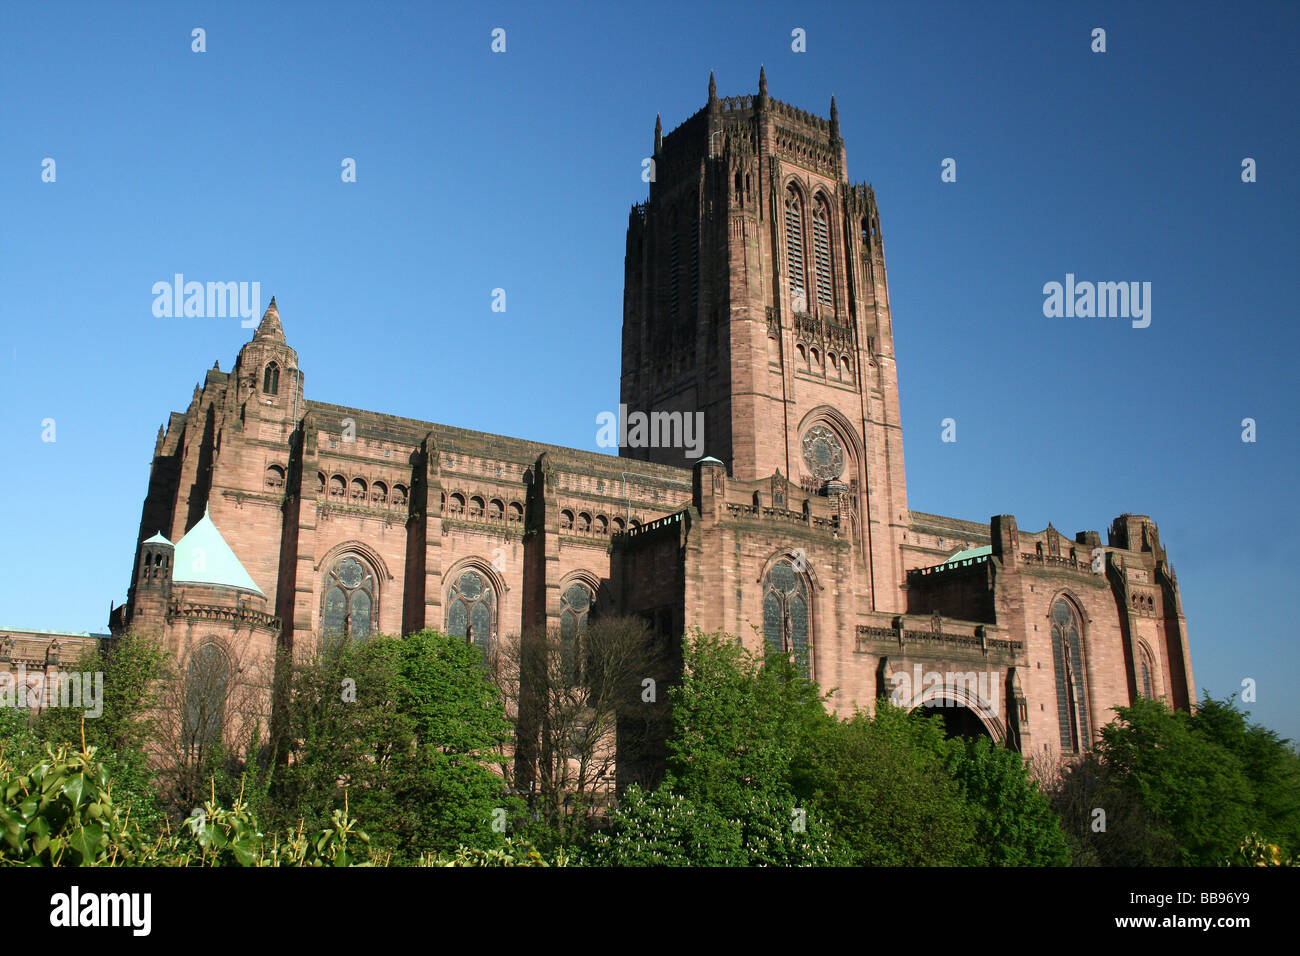 North Elevation Of Liverpool Anglican Cathedral, Merseyside, UK Stock Photo